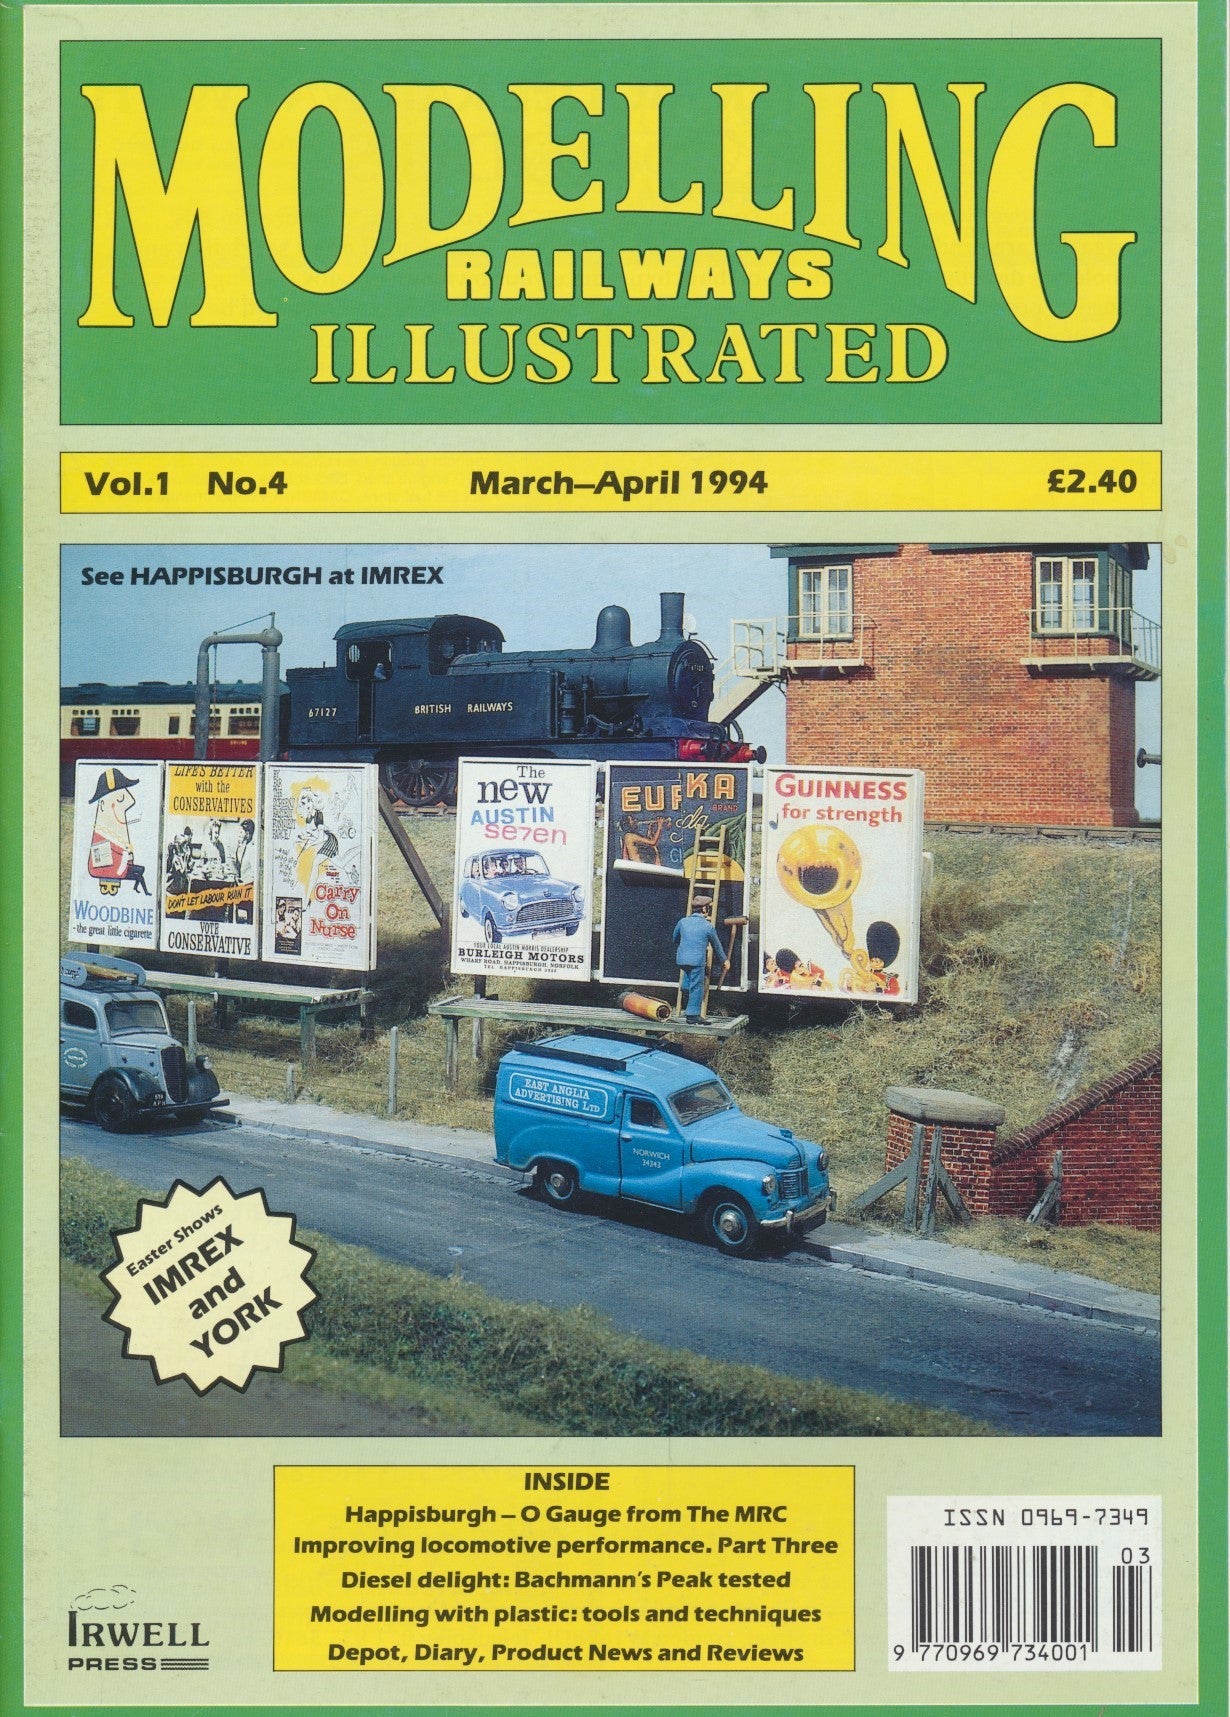 Modelling Railways Illustrated: Vol. 1 No. 4 - March-April 1994